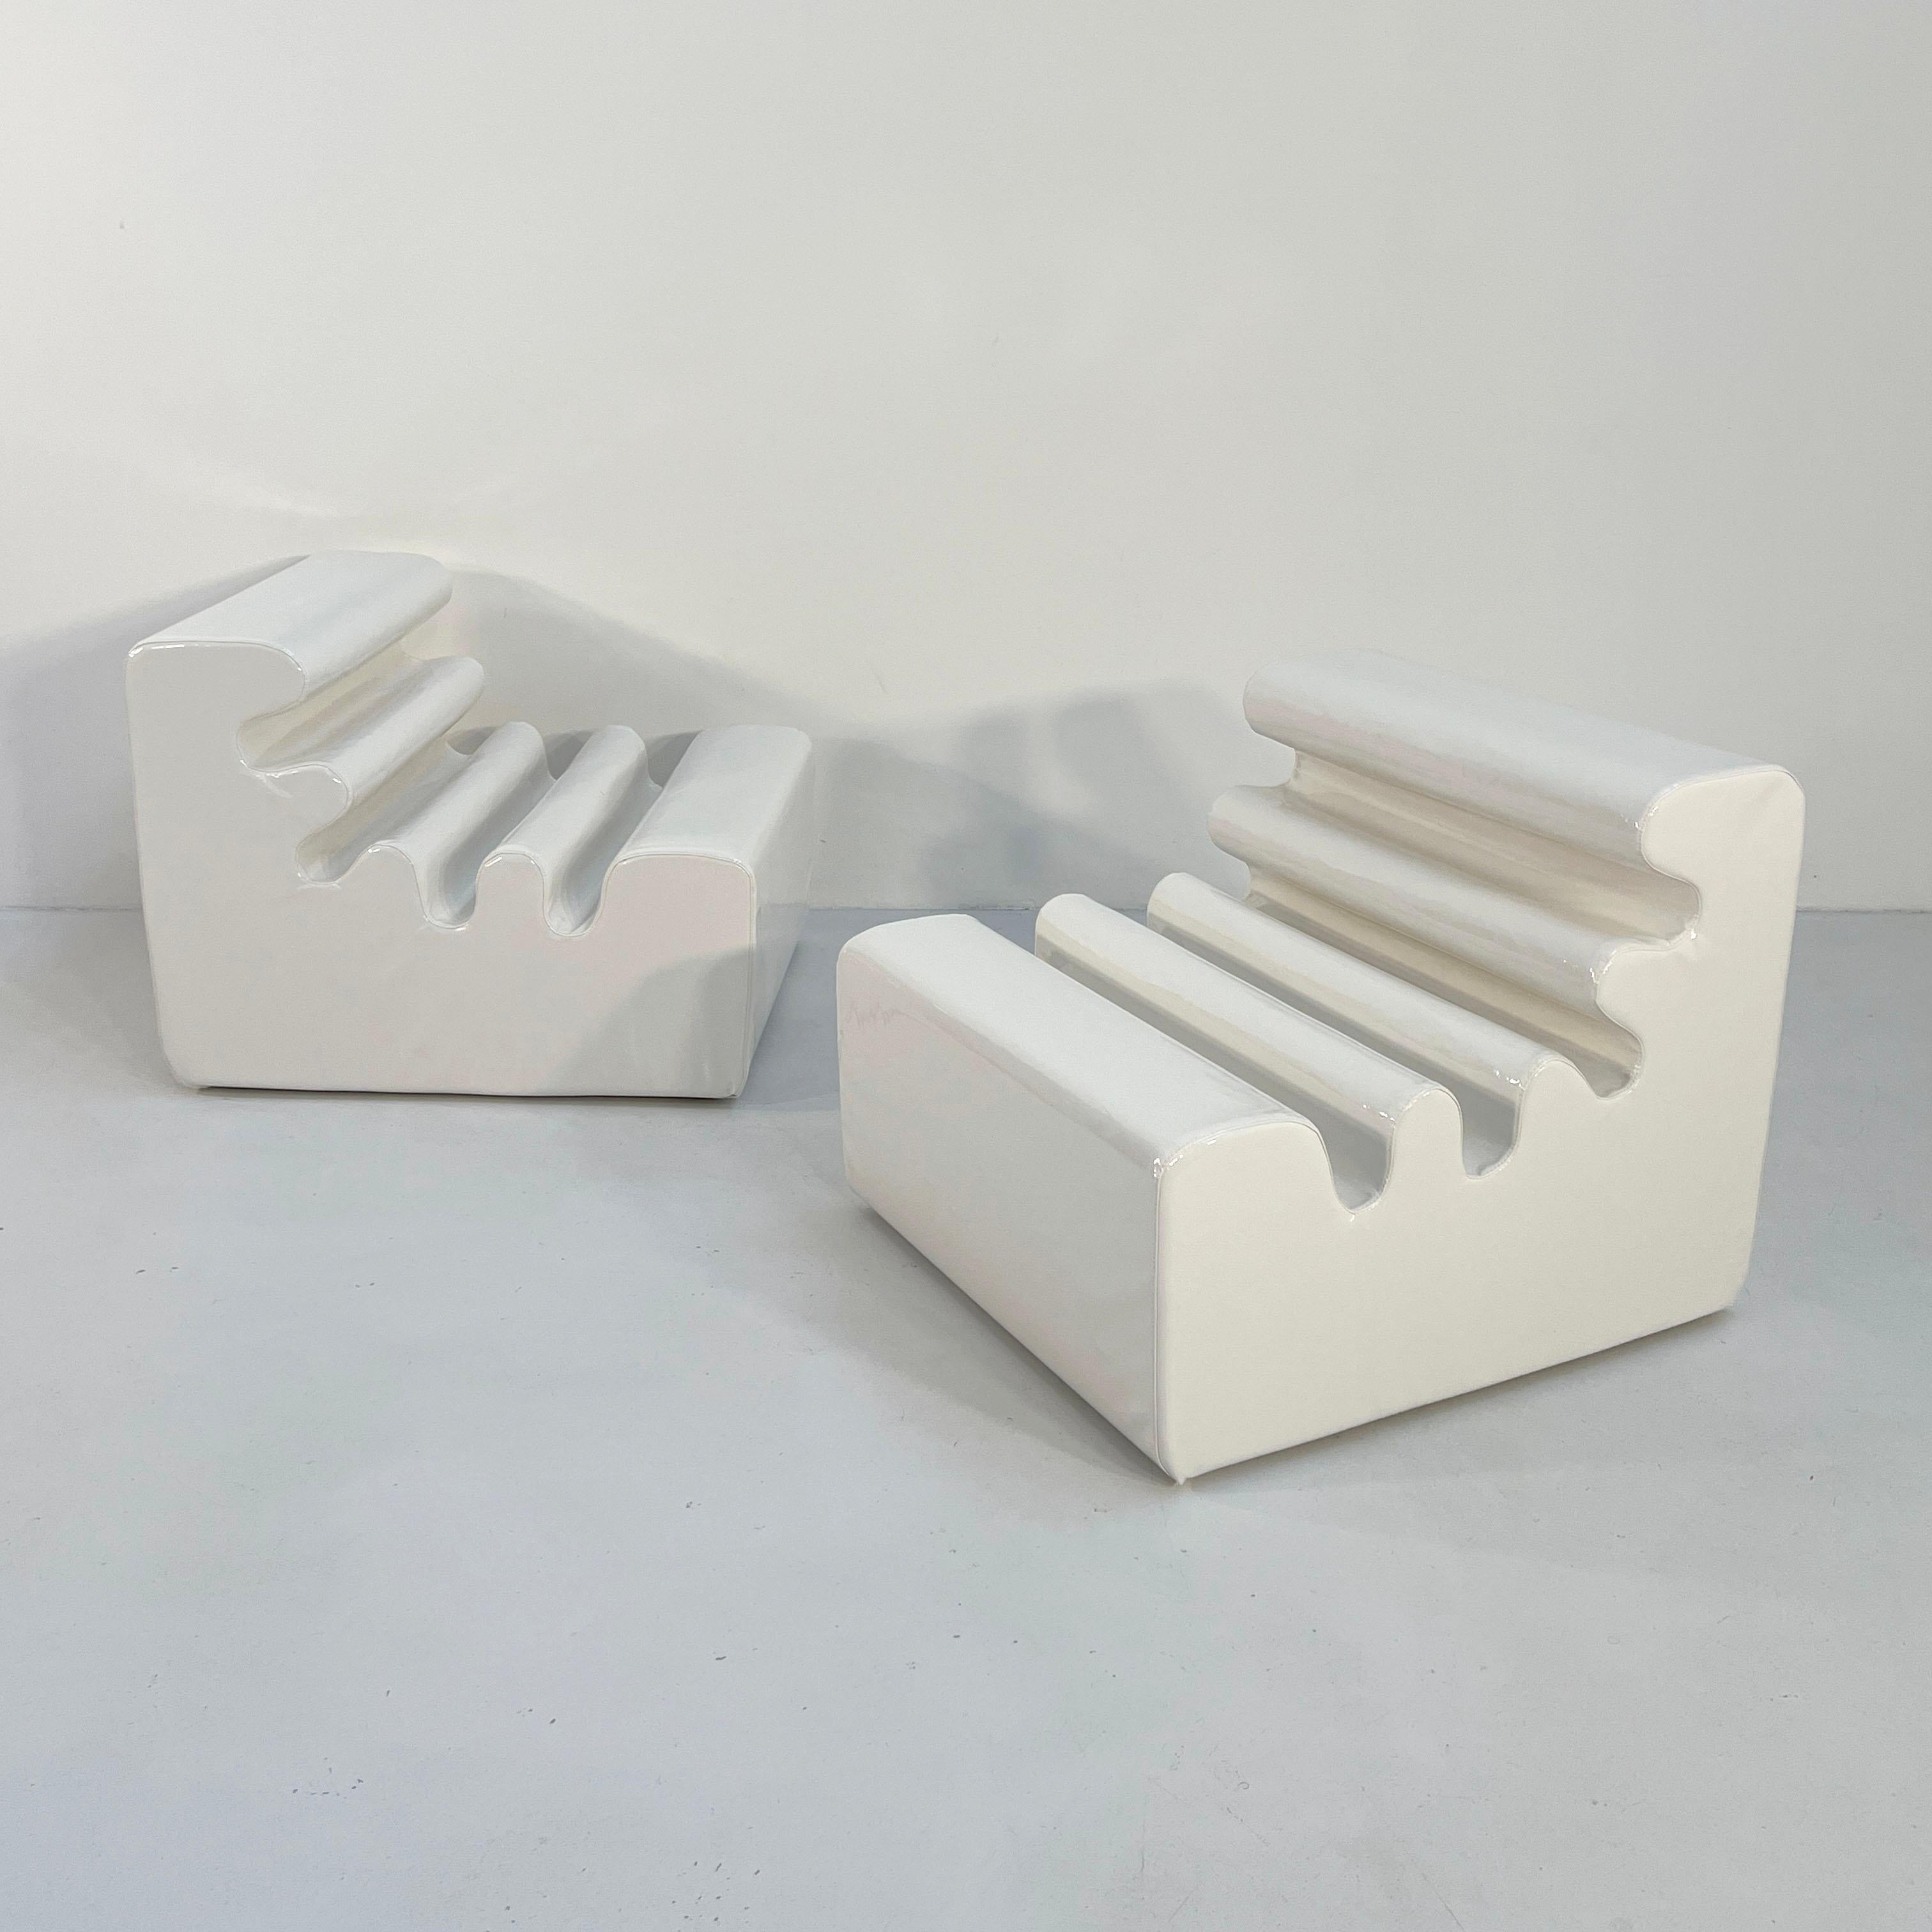 Pair of White Karelia Lounge Chairs by Liisi Beckmann for Zanotta, 1960s For Sale 2